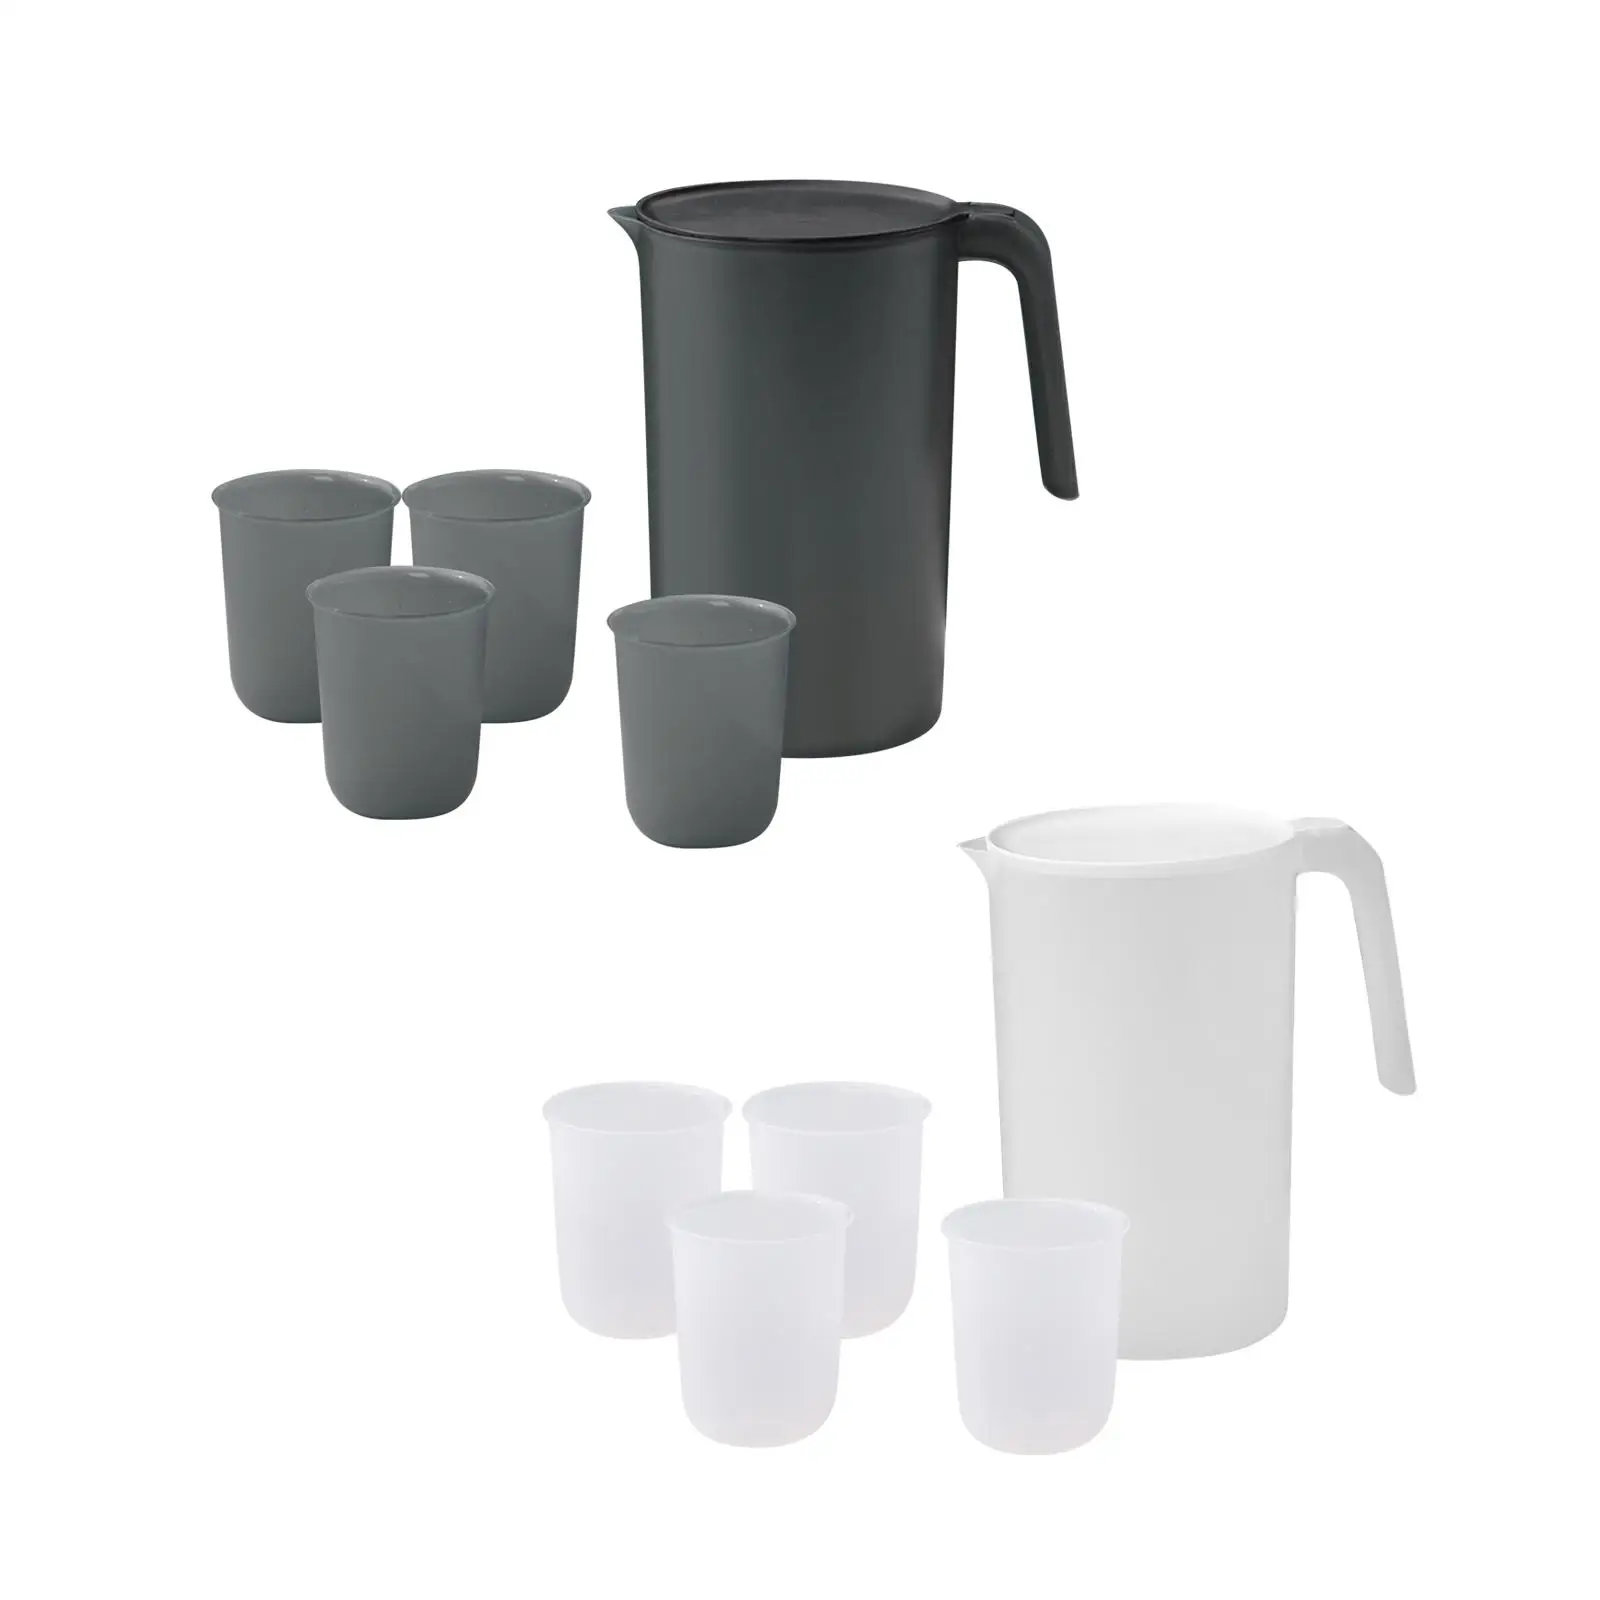 2500ml Water Jug Pitcher with 4 Cups Beverage Jar Easy to Fill Tea Kettle Water Jar Water Kettle for Hot Cold for Kitchen Office